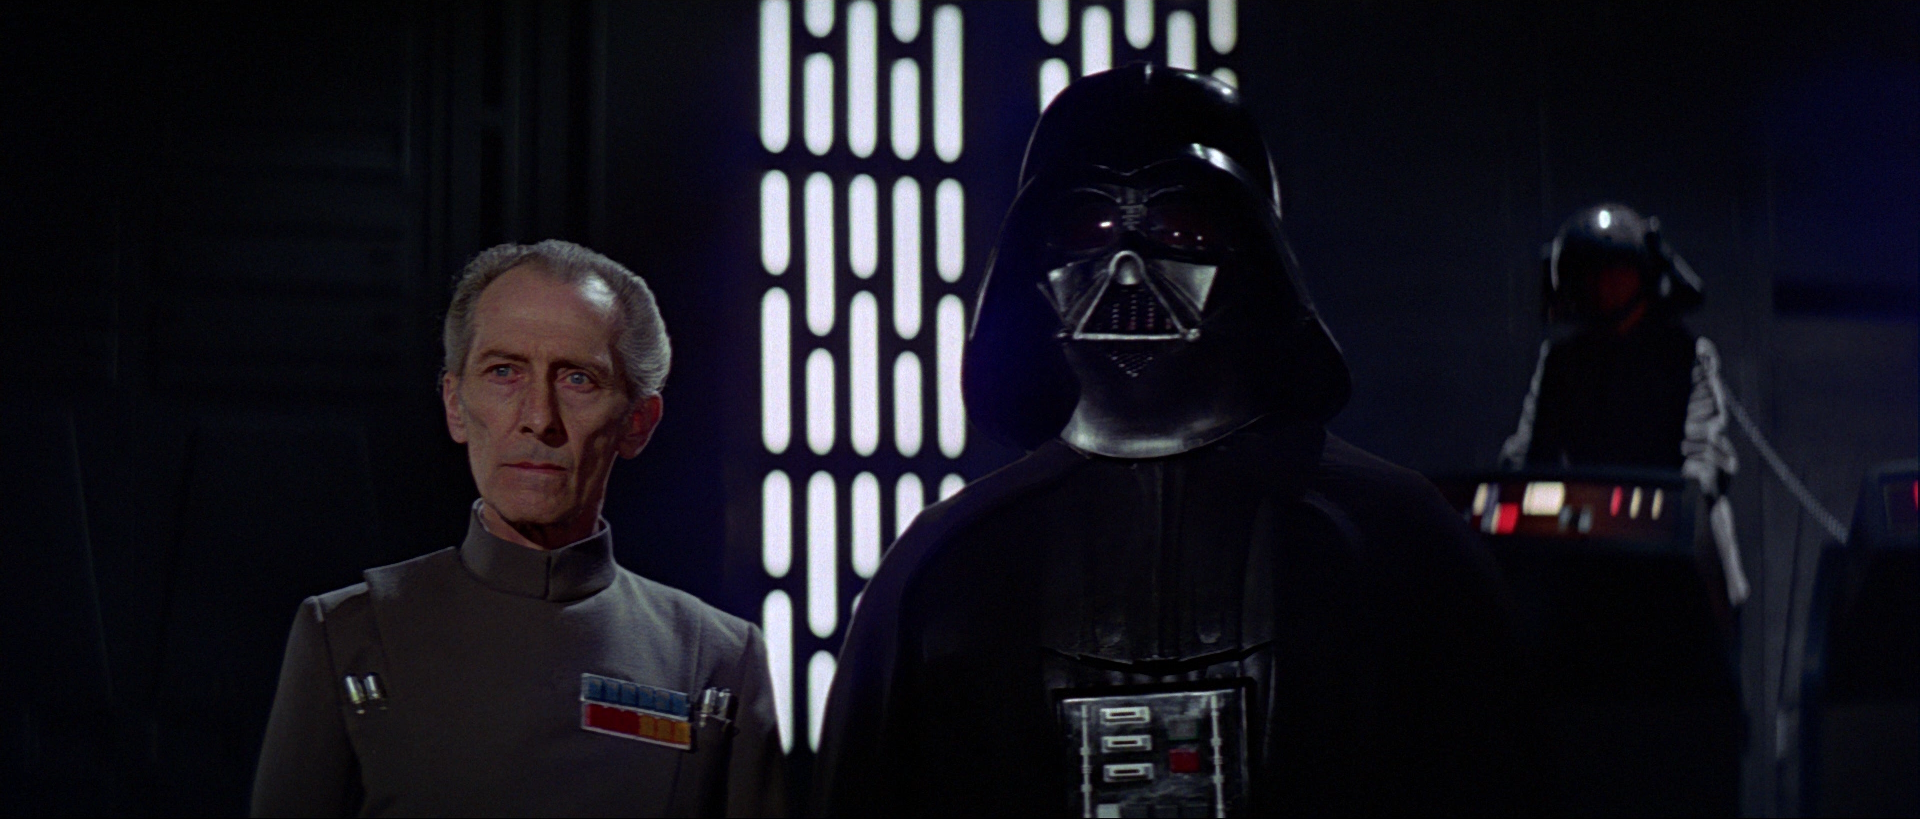 Star Wars: Rogue One - What Role Will Grand Moff Tarkin Have?